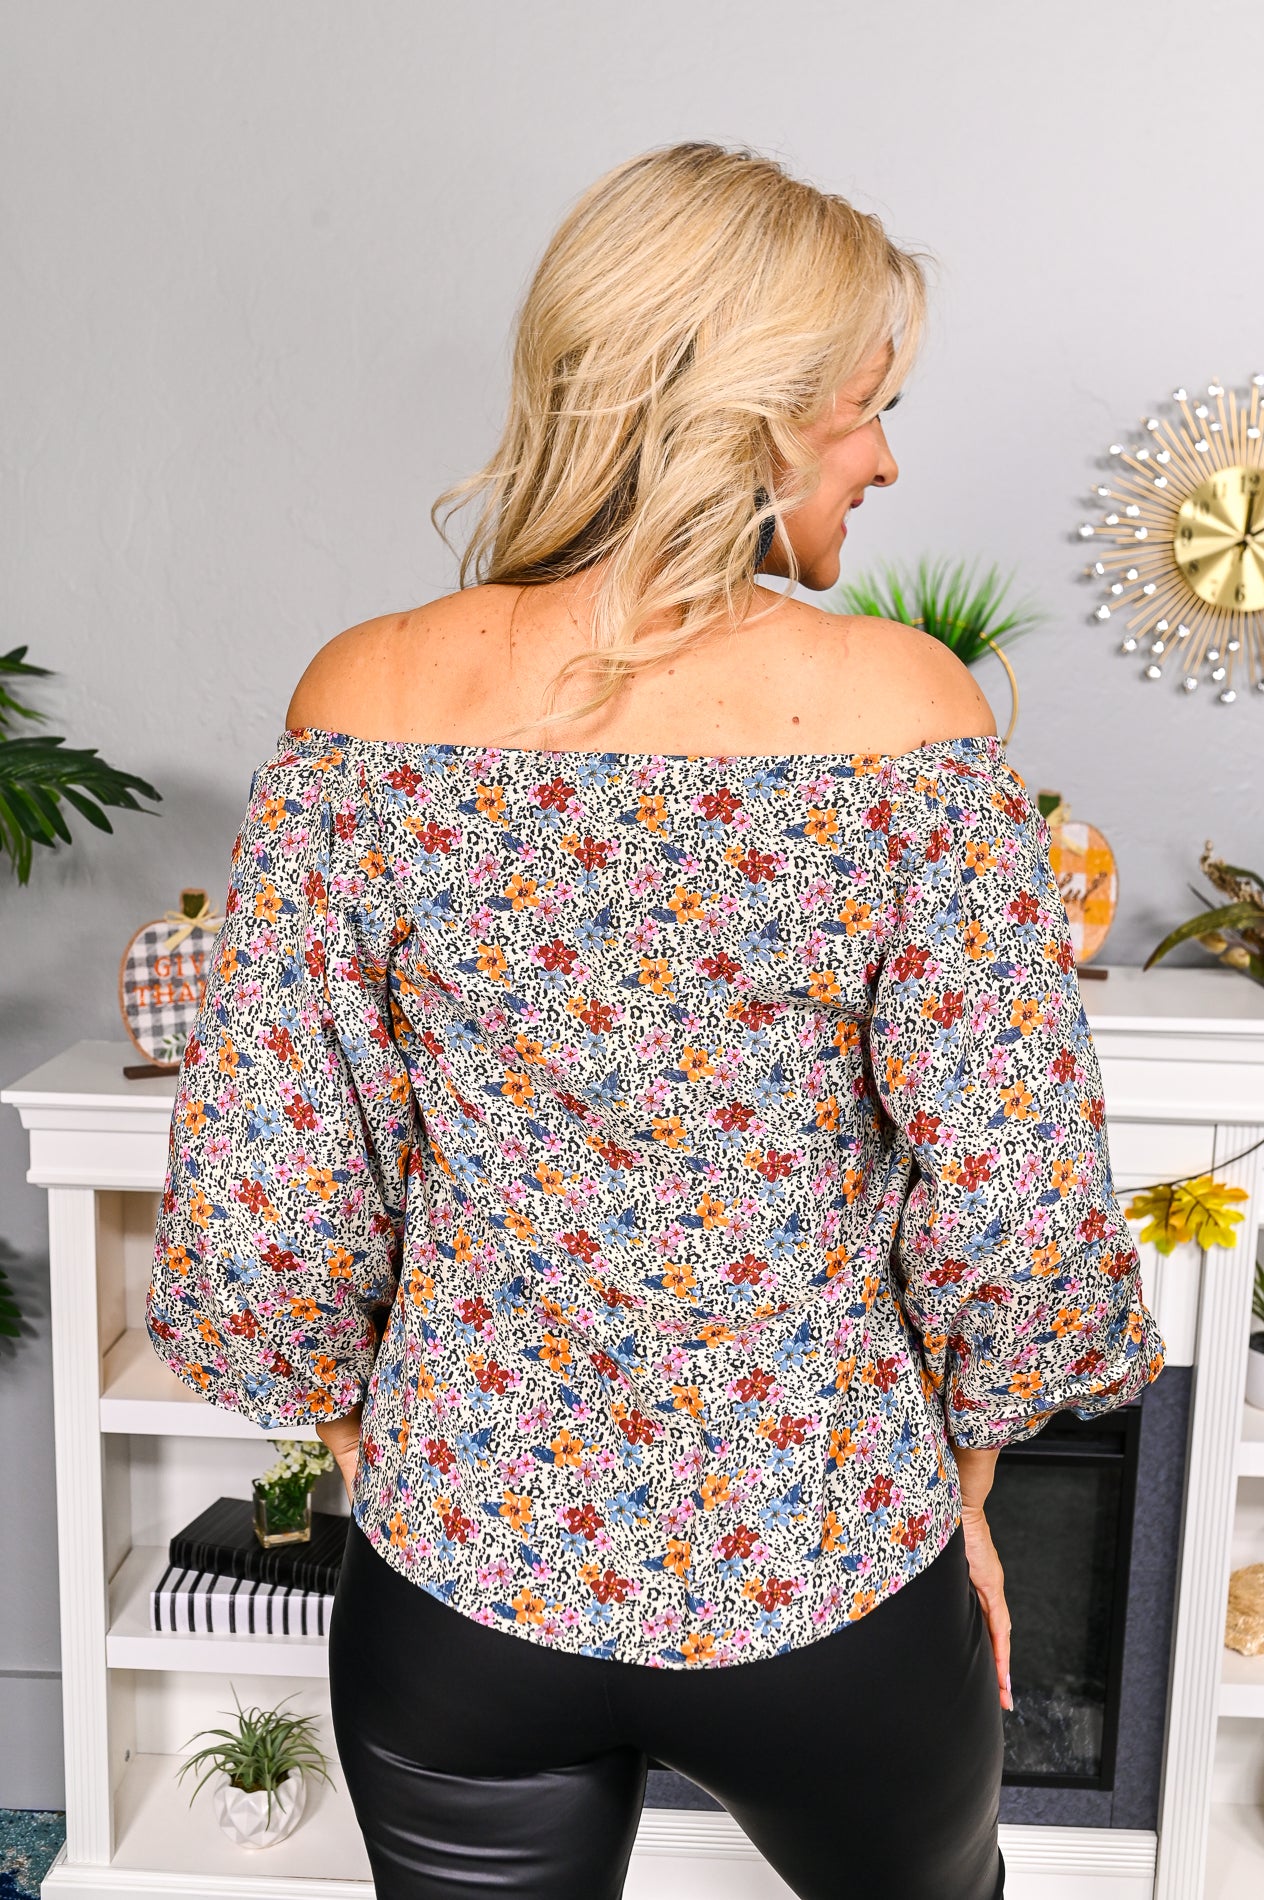 Energy Matched Taupe/Multi Color Printed/Floral Top - T5313TA